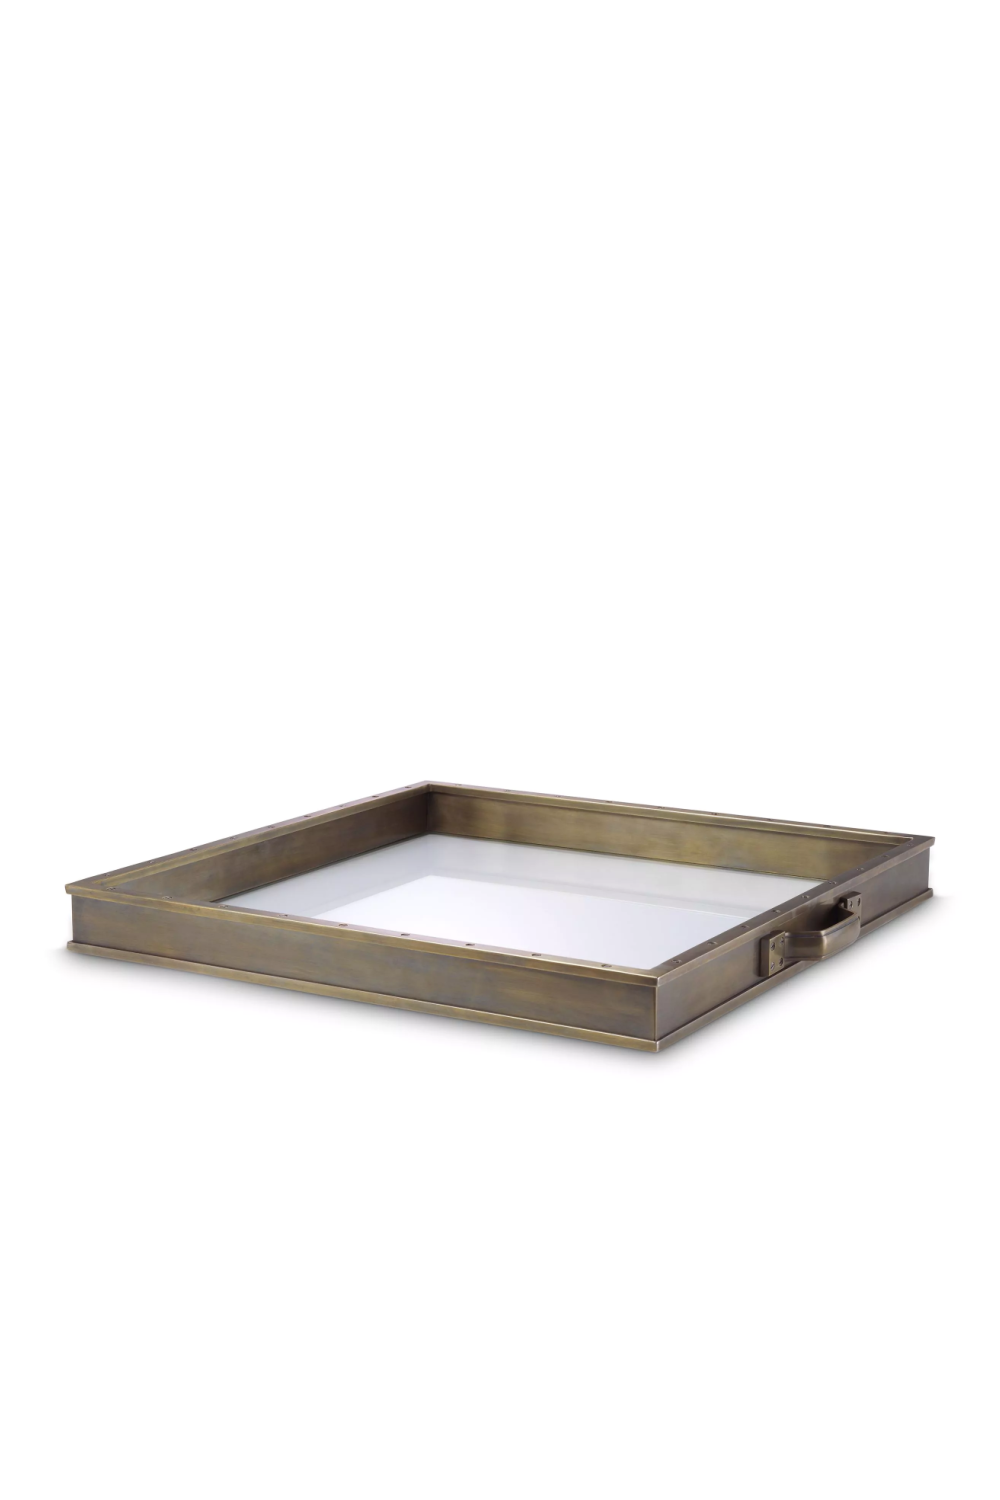 Framed Glass Tray L | Eichholtz Trouvaille | OROA.com